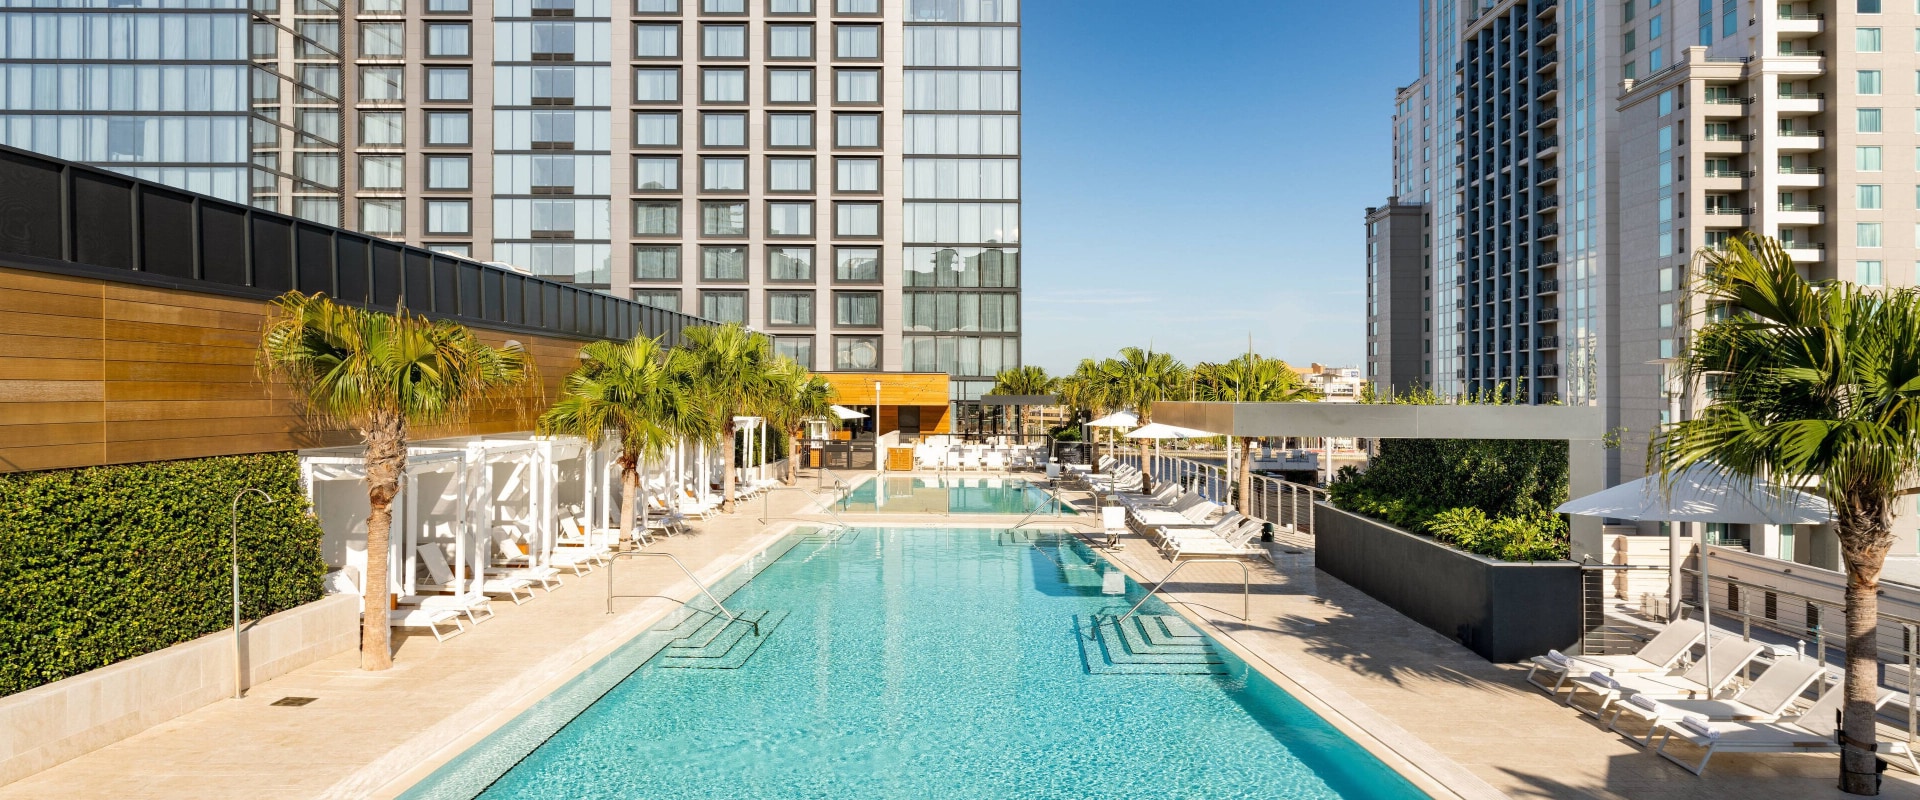 The Best 2-Star Hotels and Resorts in Tampa, Florida